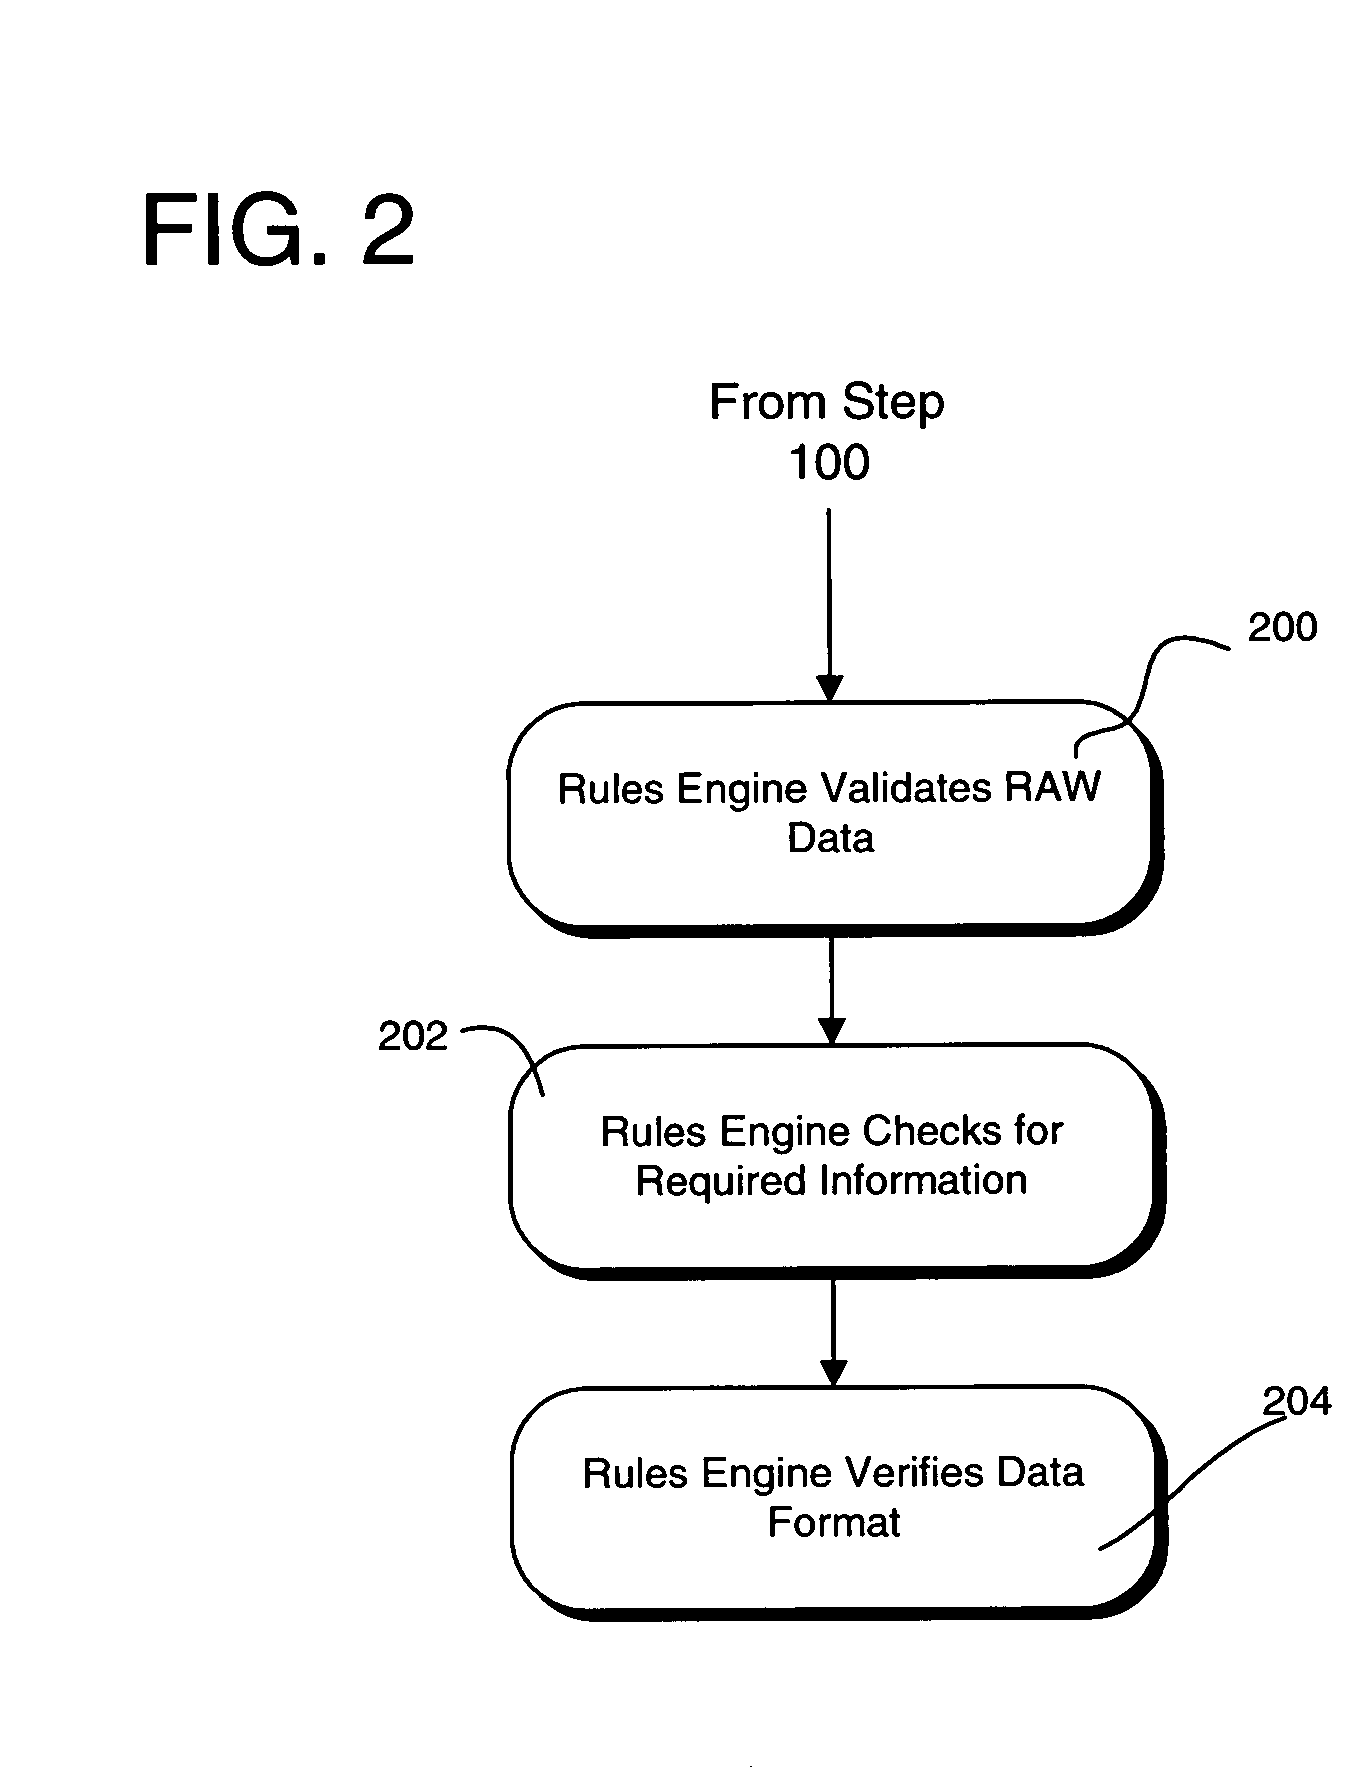 Method and system for electronically routing and processing information